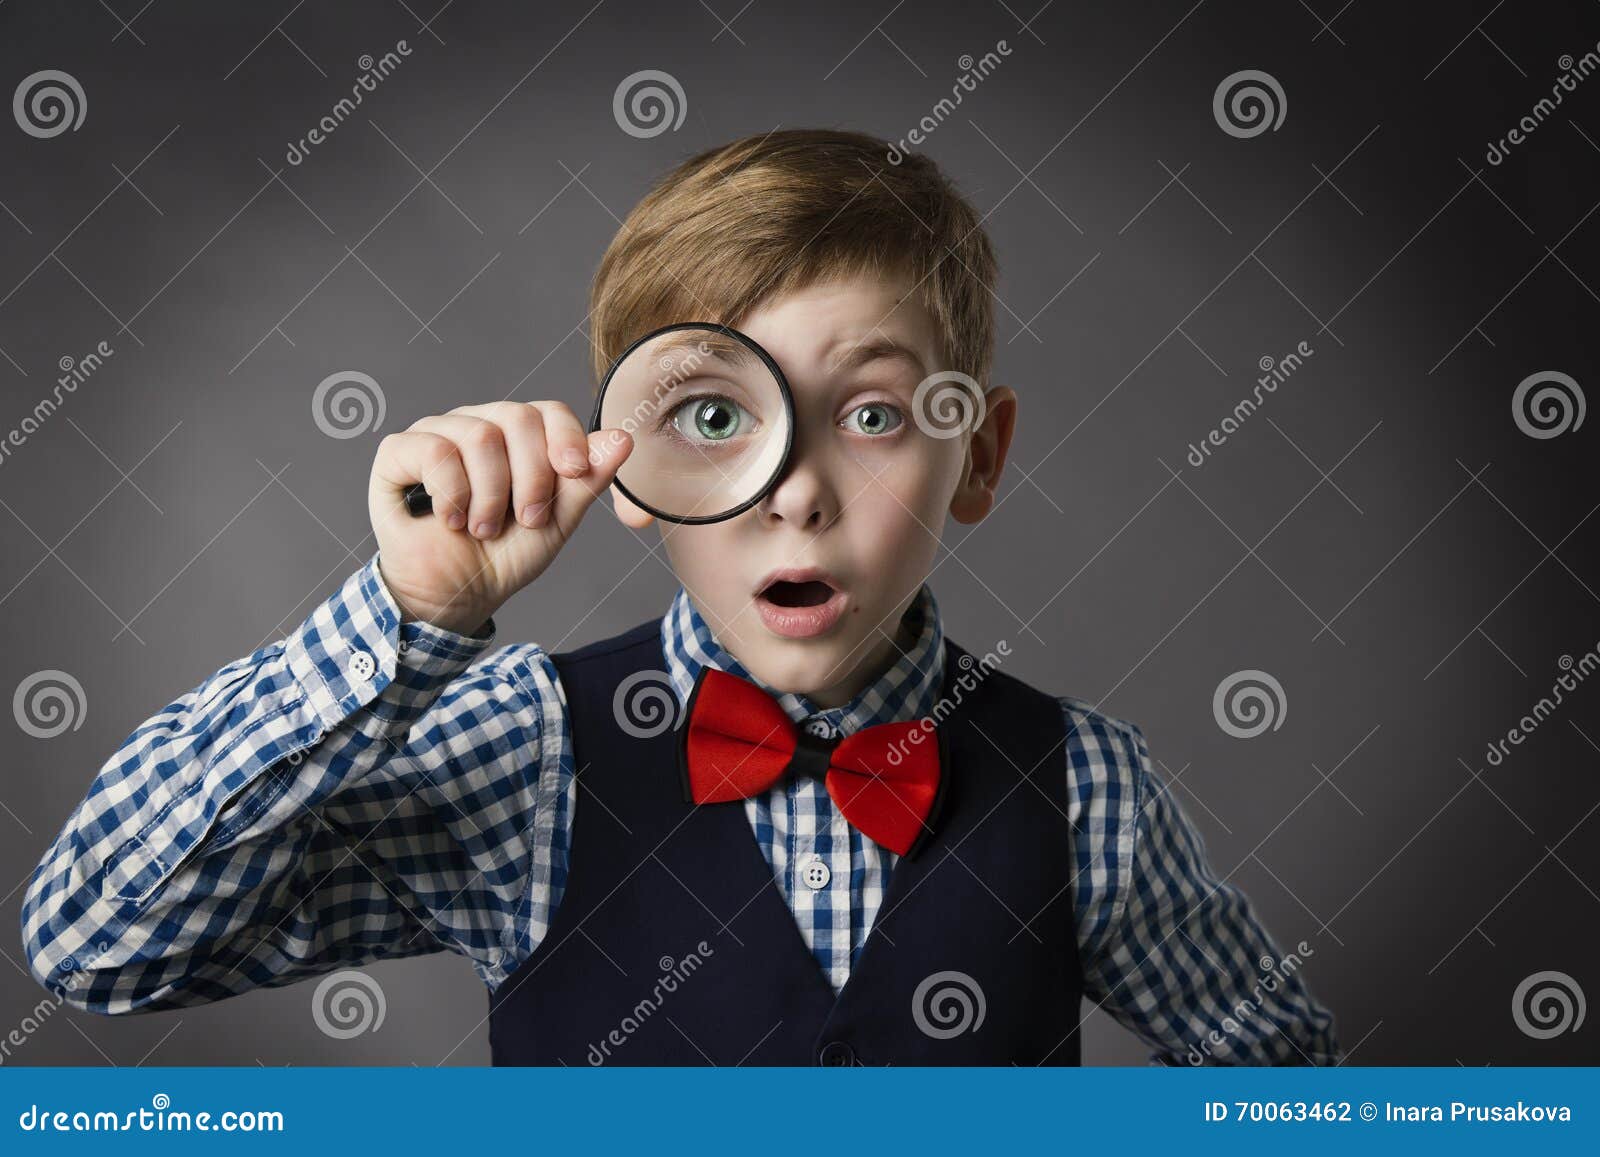 child see through magnifying glass, kid eye magnifier lens